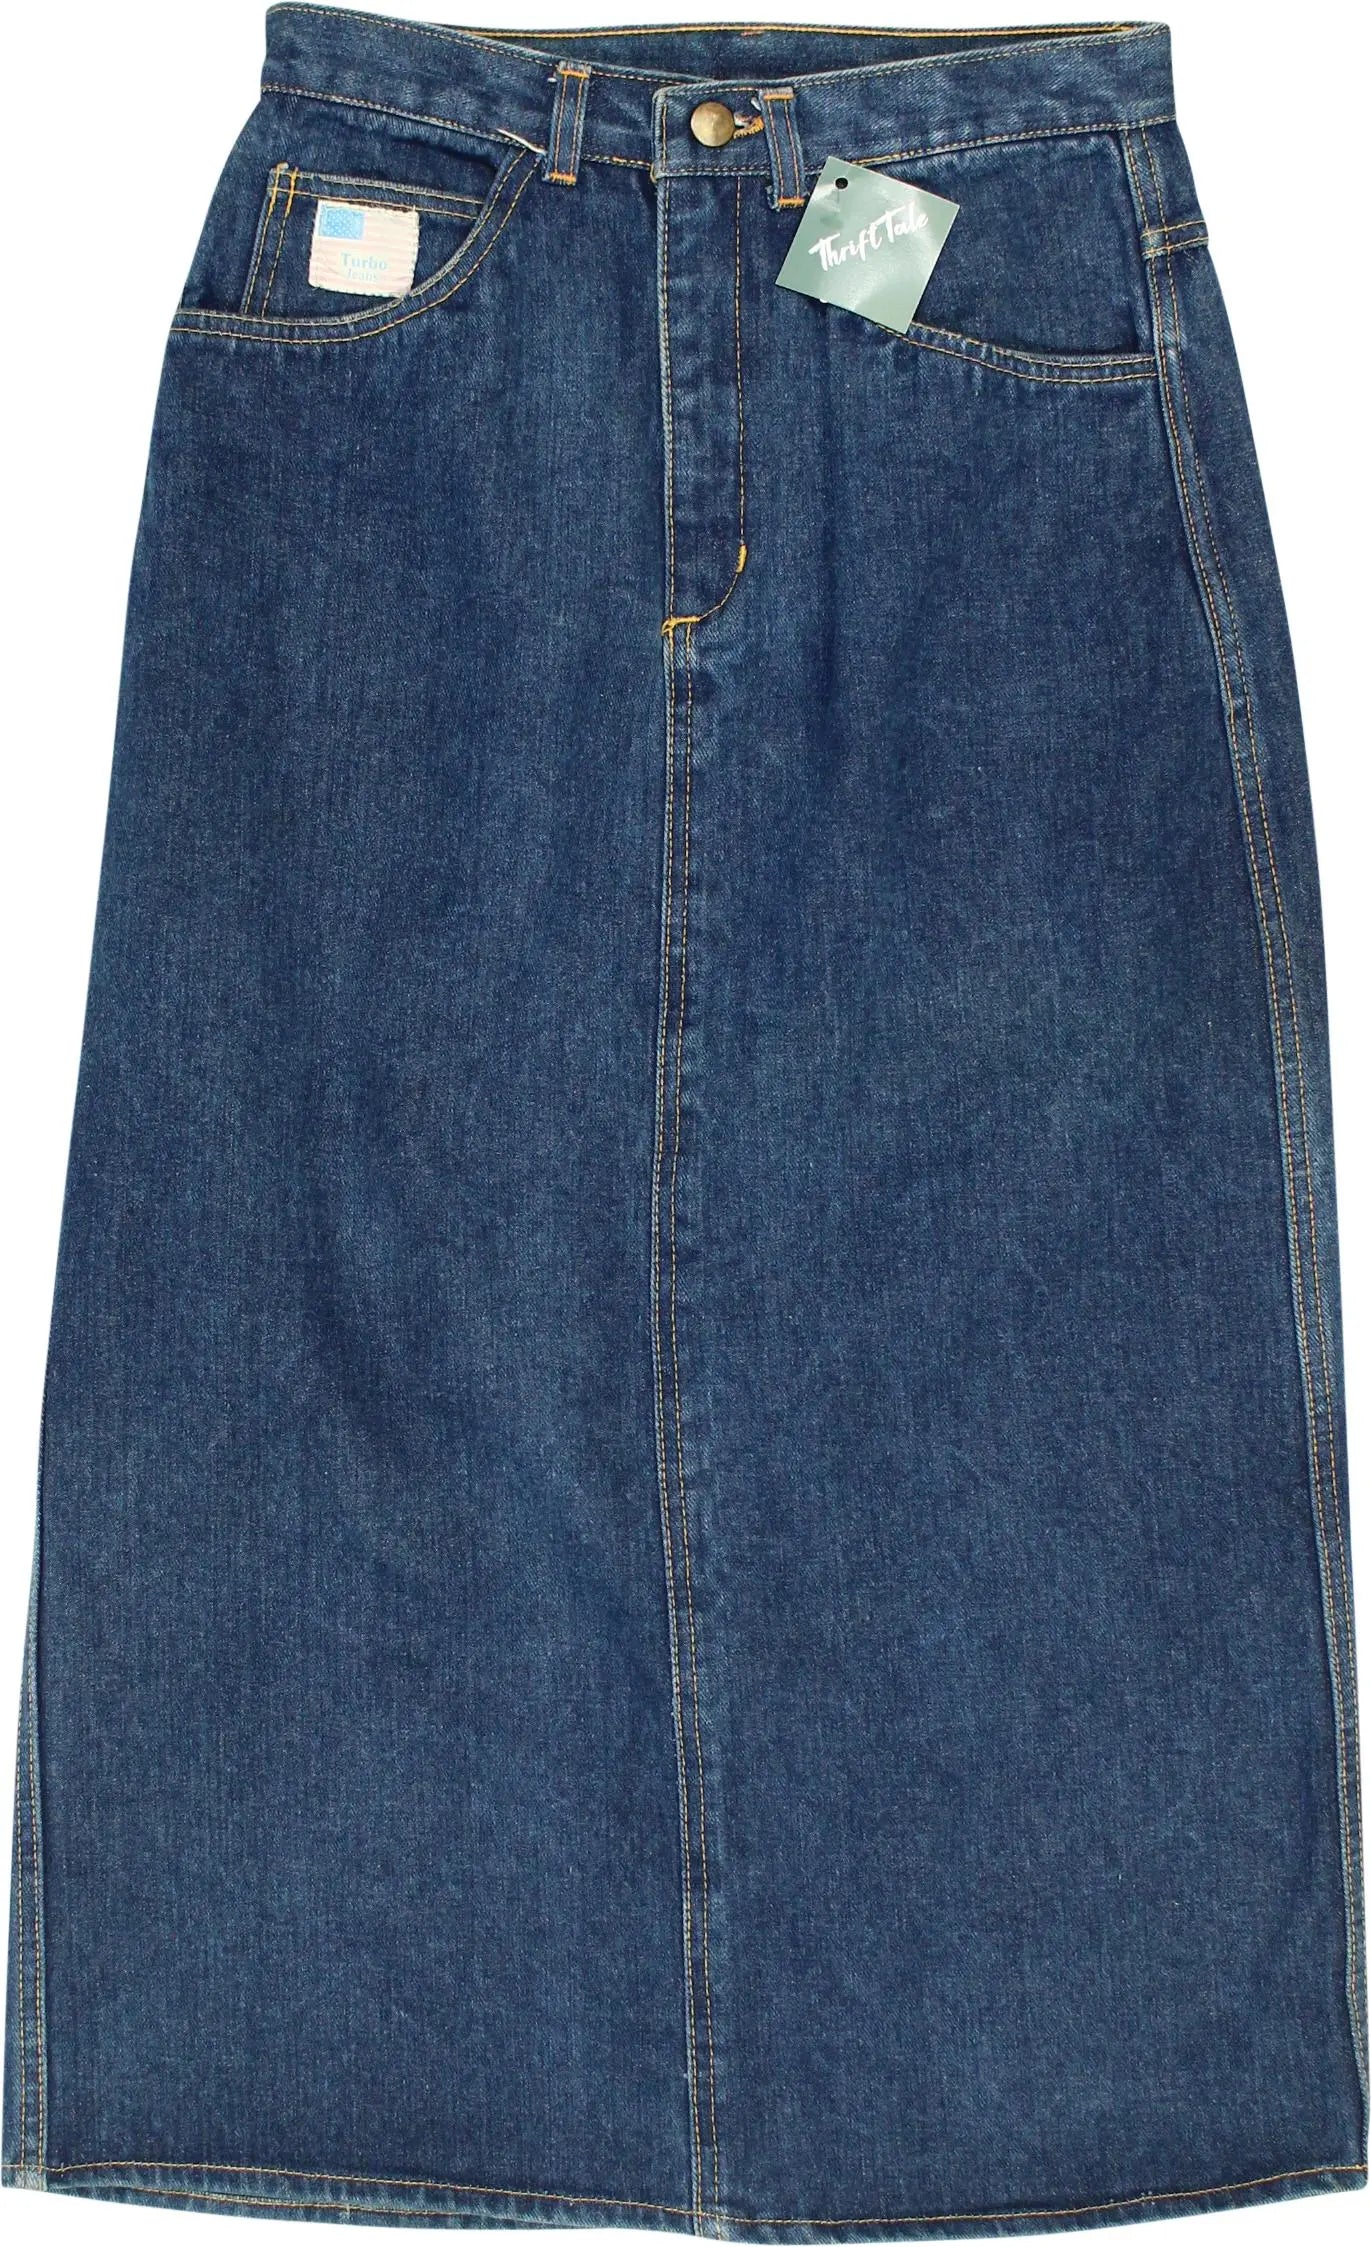 Turbo Jeans - Denim Midi Skirt- ThriftTale.com - Vintage and second handclothing